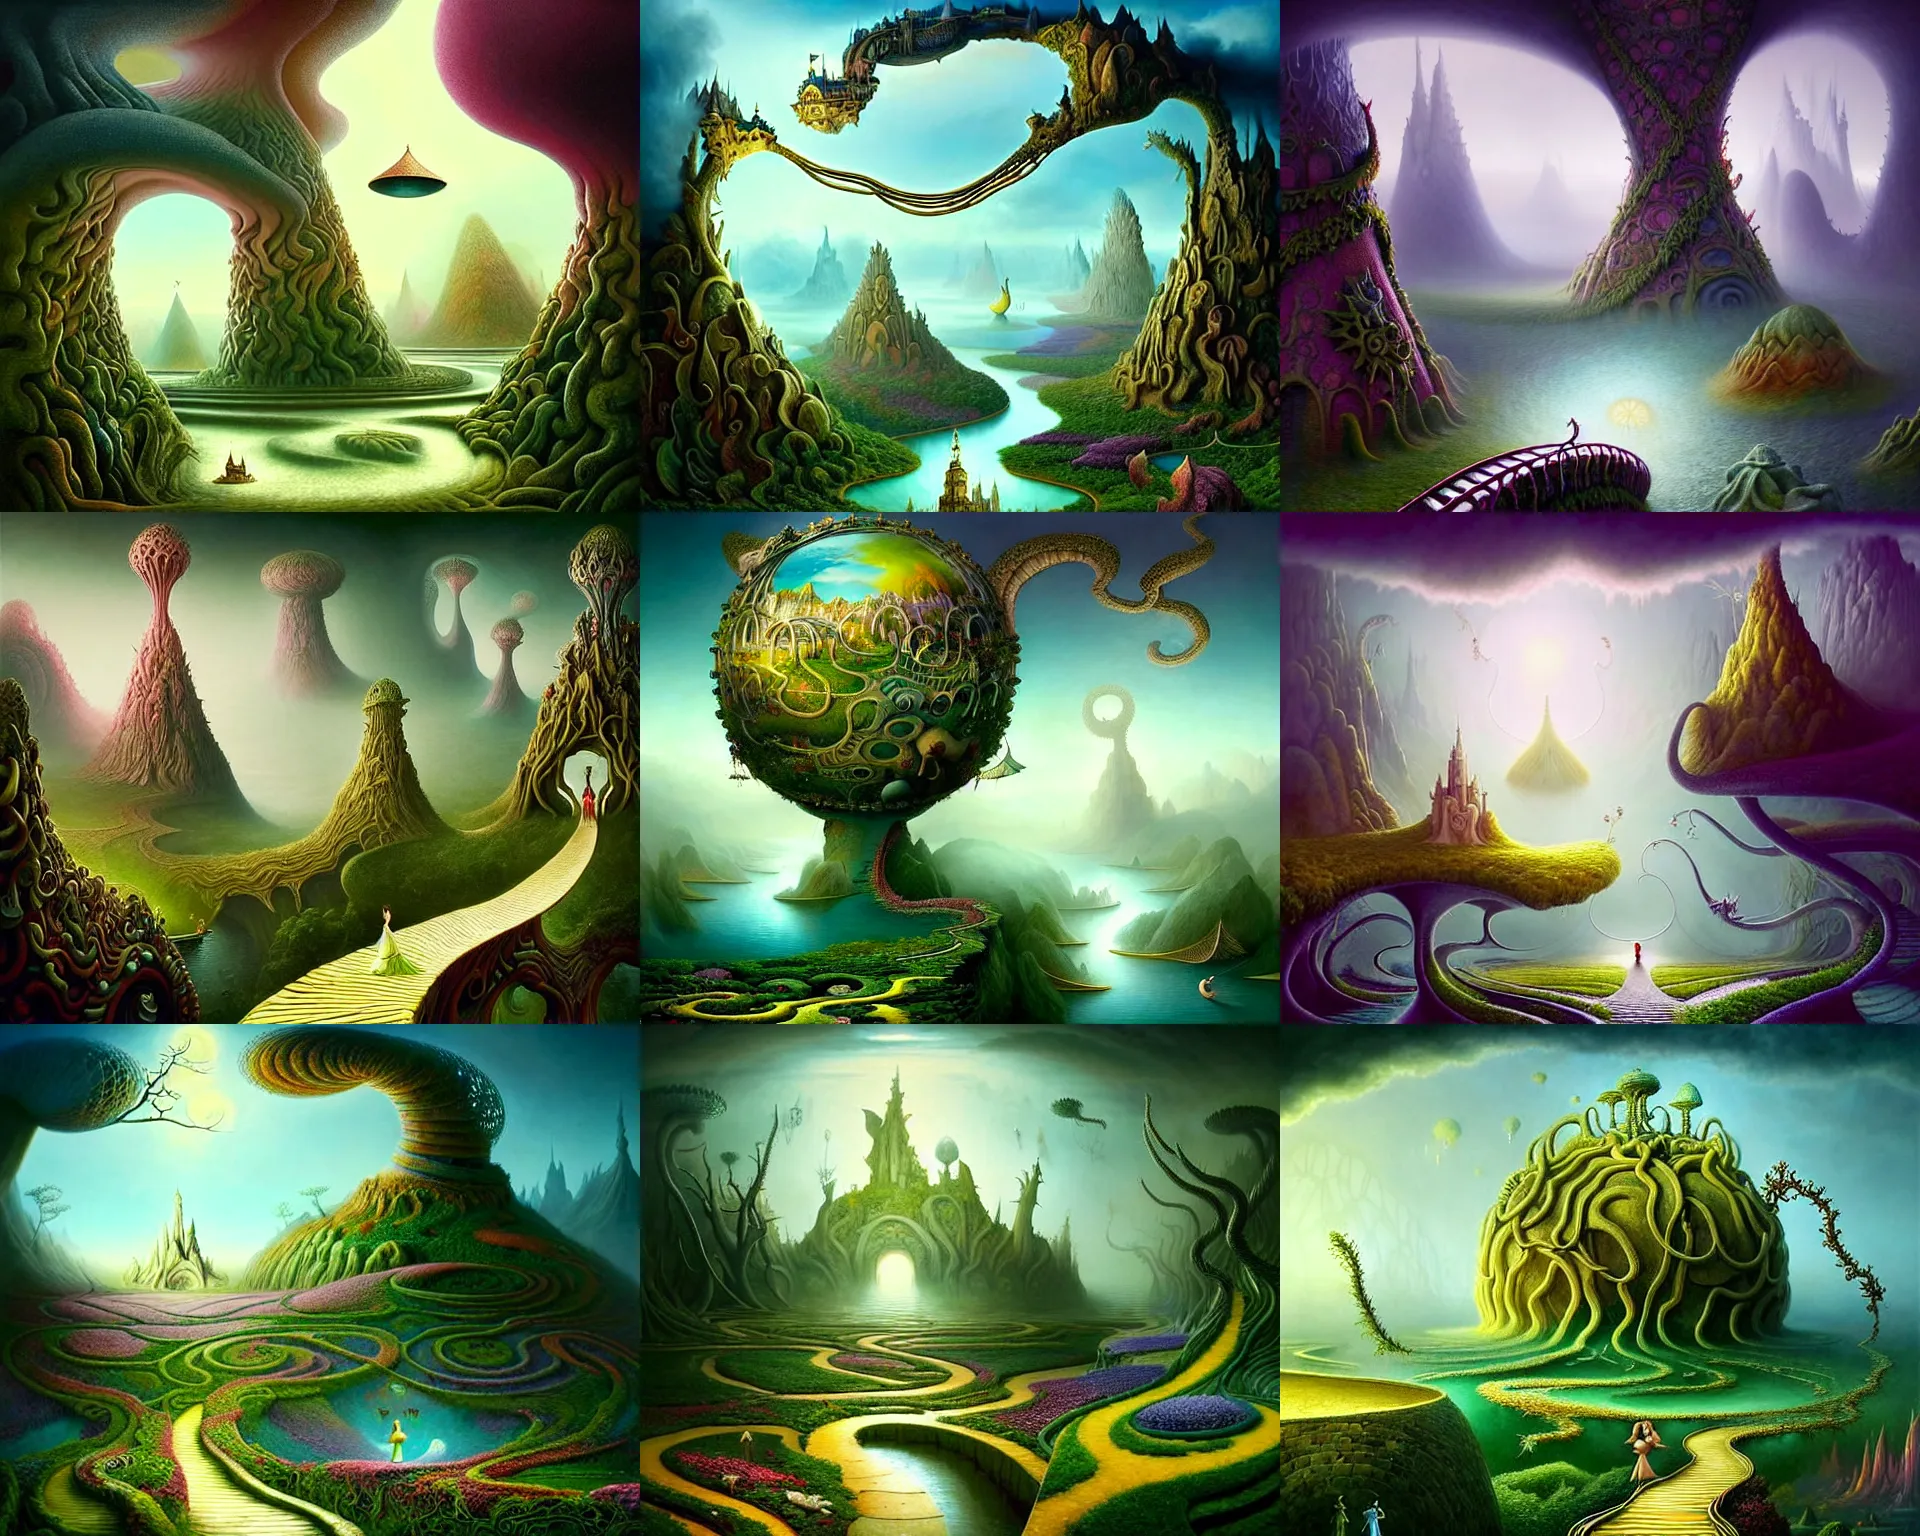 Prompt: a beguiling epic stunning beautiful and insanely detailed matte painting of the impossible winding path through fairy dream worlds with surreal architecture designed by Heironymous Bosch, mega structures inspired by Heironymous Bosch's Garden of Earthly Delights, vast surreal landscape and horizon by Cyril Rolando and Natalie Shau, masterpiece!!!, grand!, imaginative!!!, whimsical!!, epic scale, intricate details, sense of awe, elite, wonder, insanely complex, masterful composition!!!, sharp focus, fantasy realism, dramatic lighting